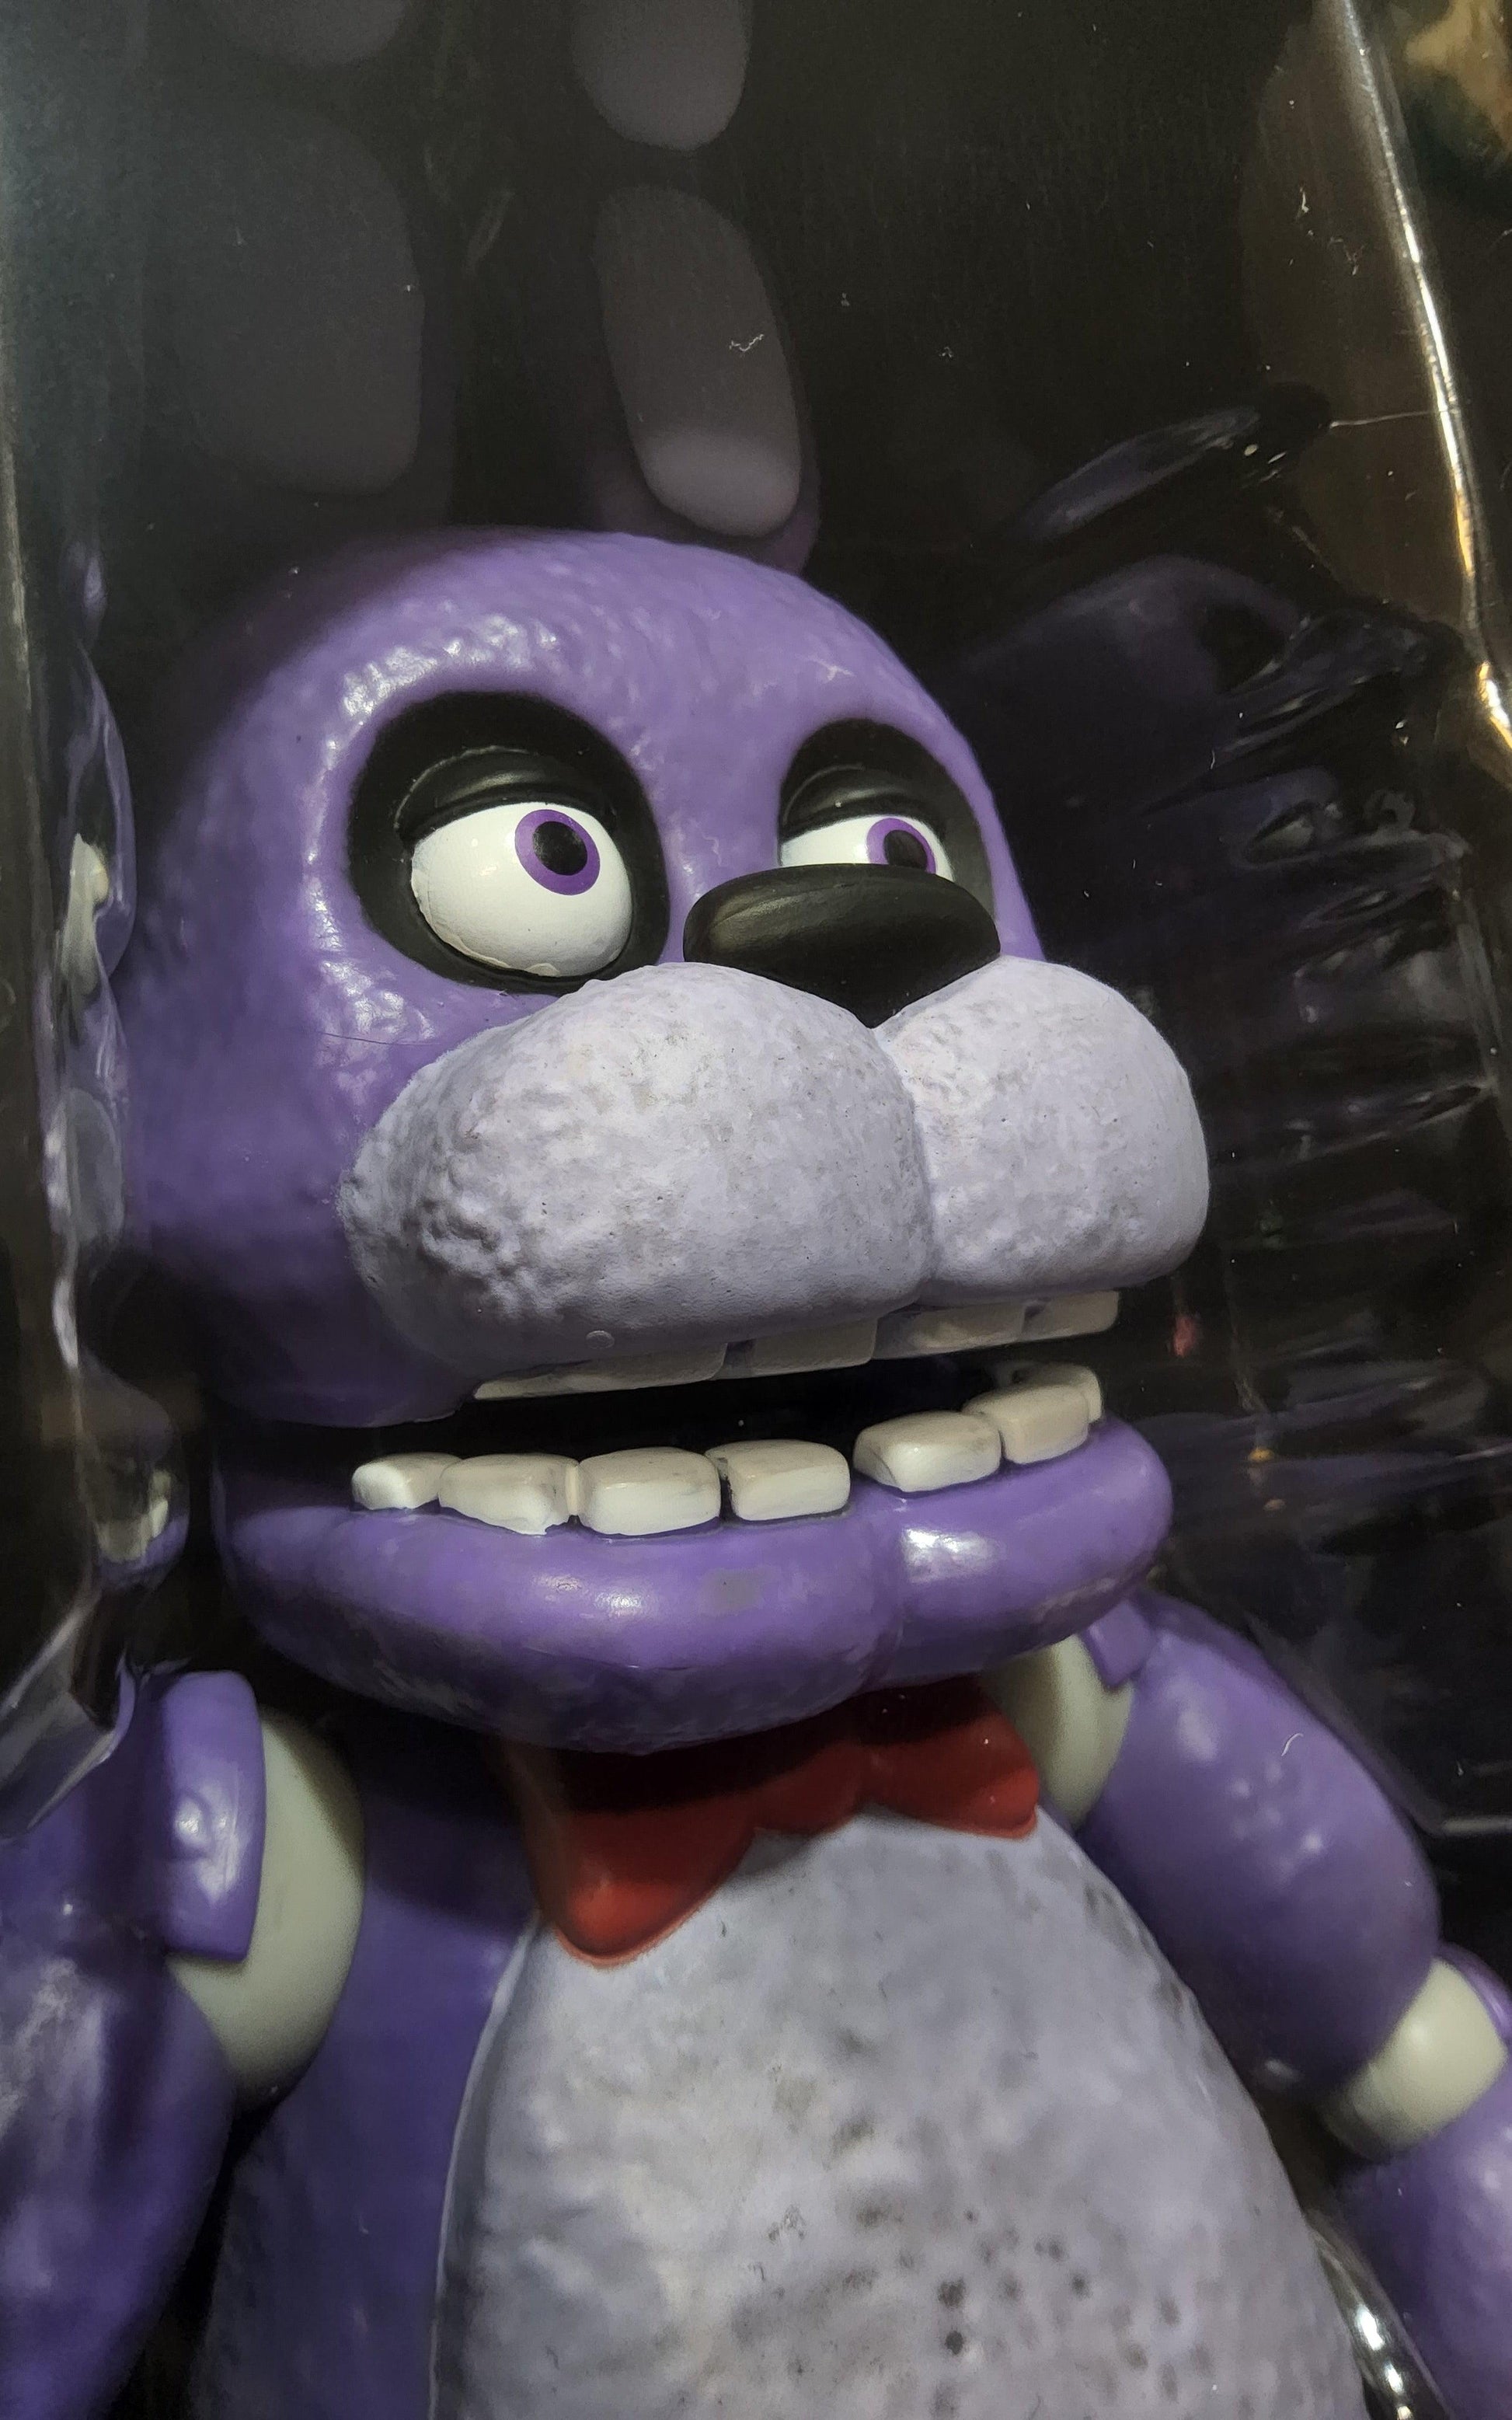 Funko Five Nights at Freddy's 13.5" Bonnie & Guitar FNAF Action Figure - Logan's Toy Chest